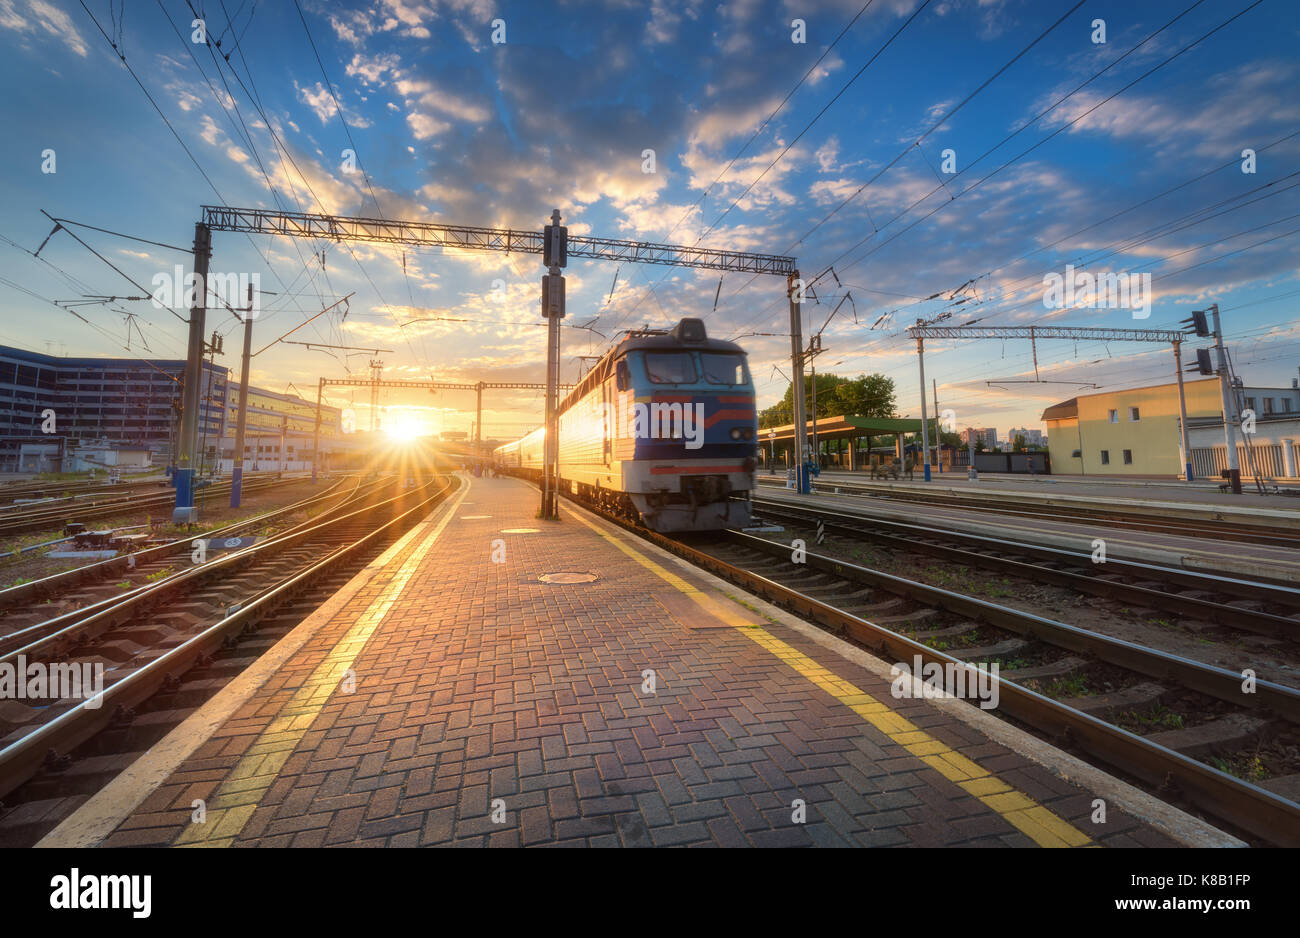 High speed passenger train on railroad track at sunset in Europe. Railway station with modern commuter train departure, blue sky with clouds and sun.  Stock Photo